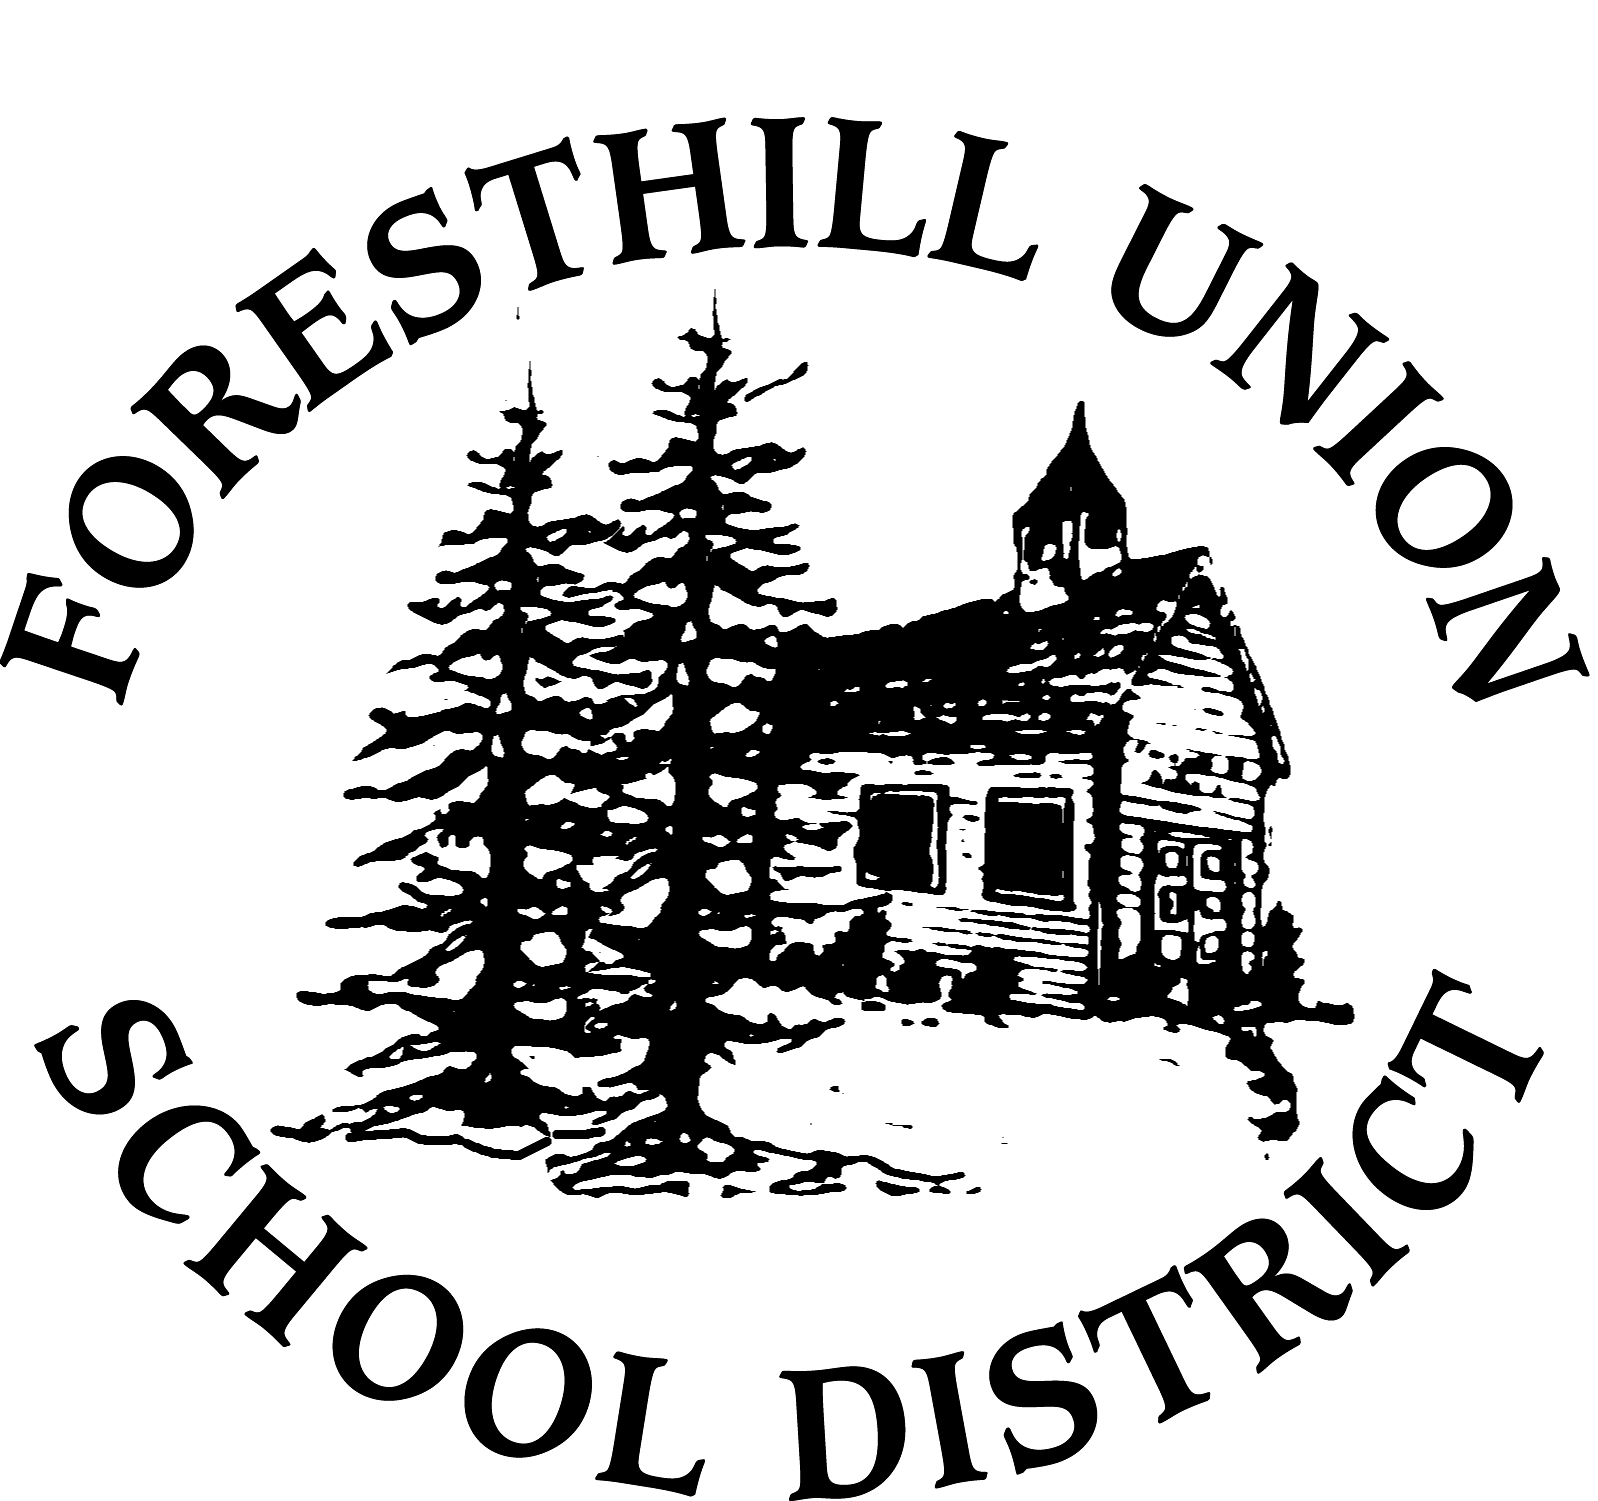 Foresthill Union School District  Logo